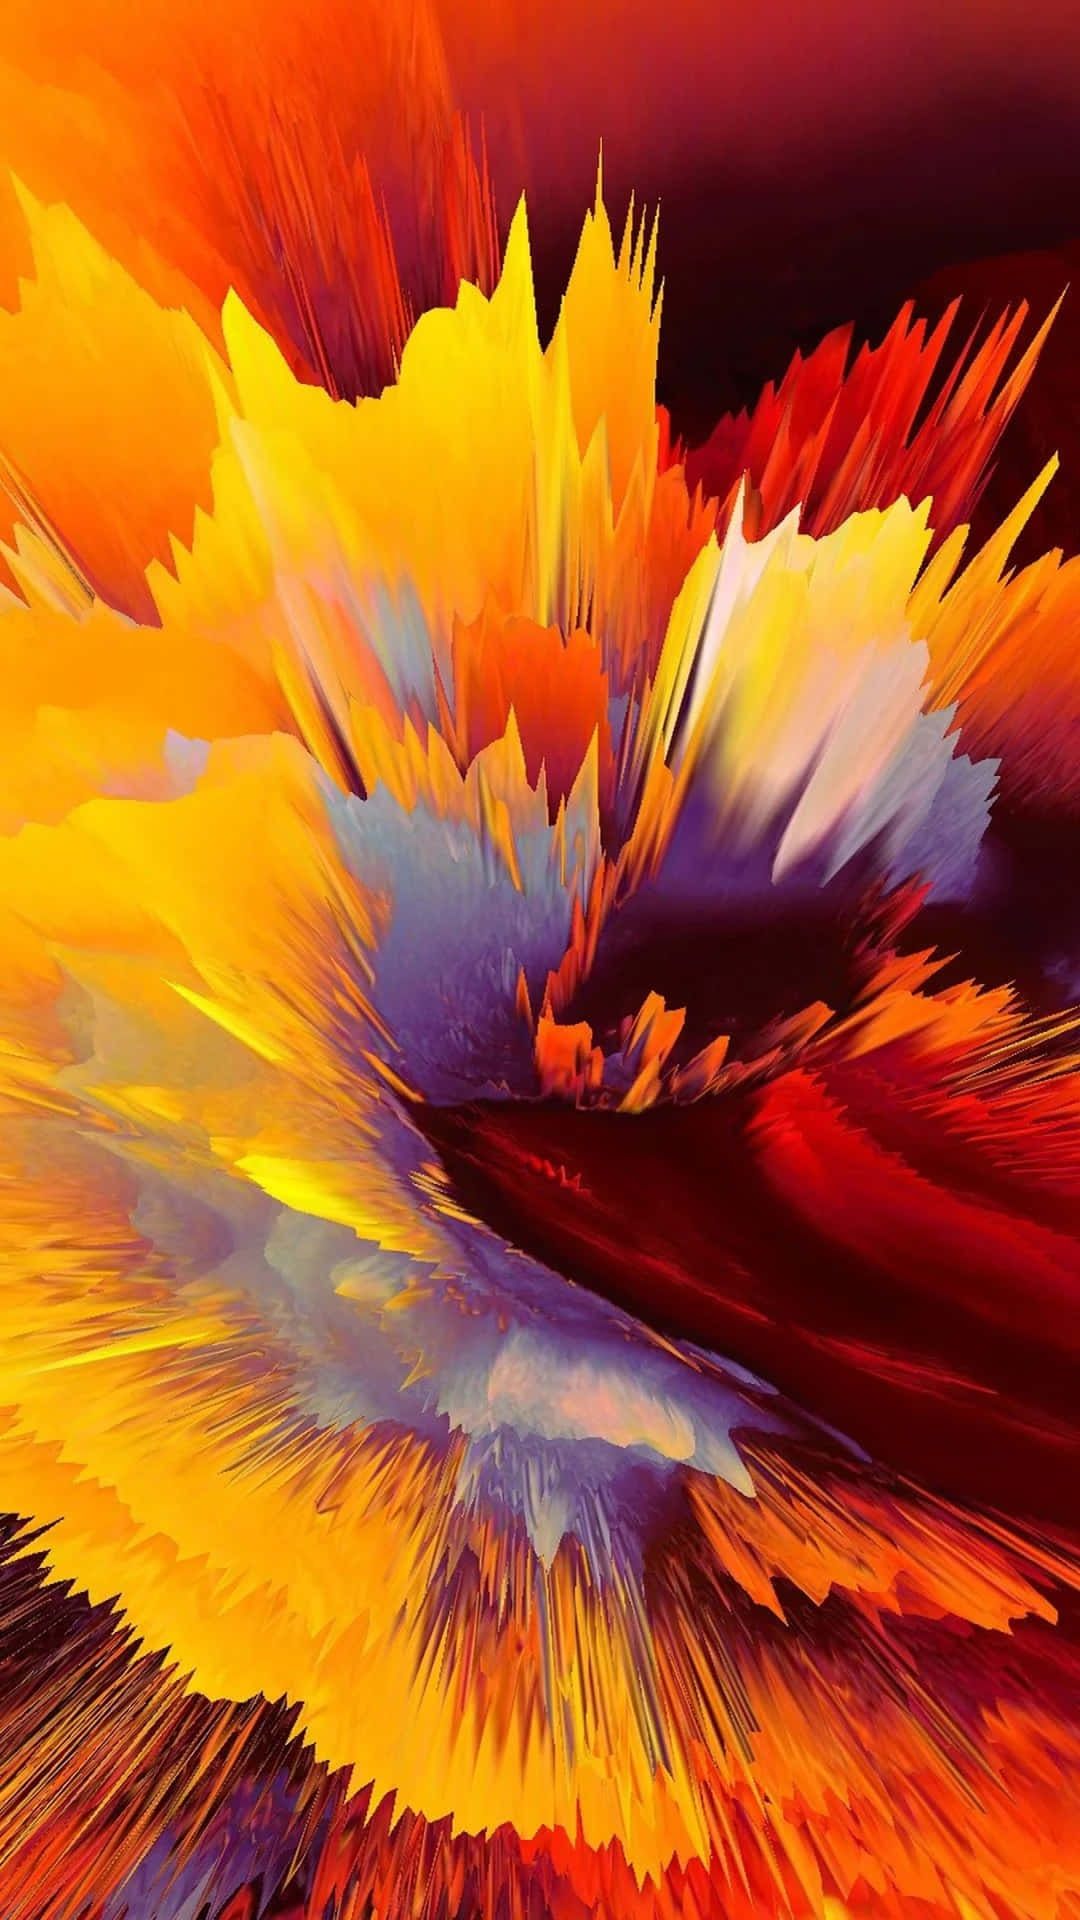 "Colorful Explosion - Abstract 4K Phone Wallpaper" Wallpaper